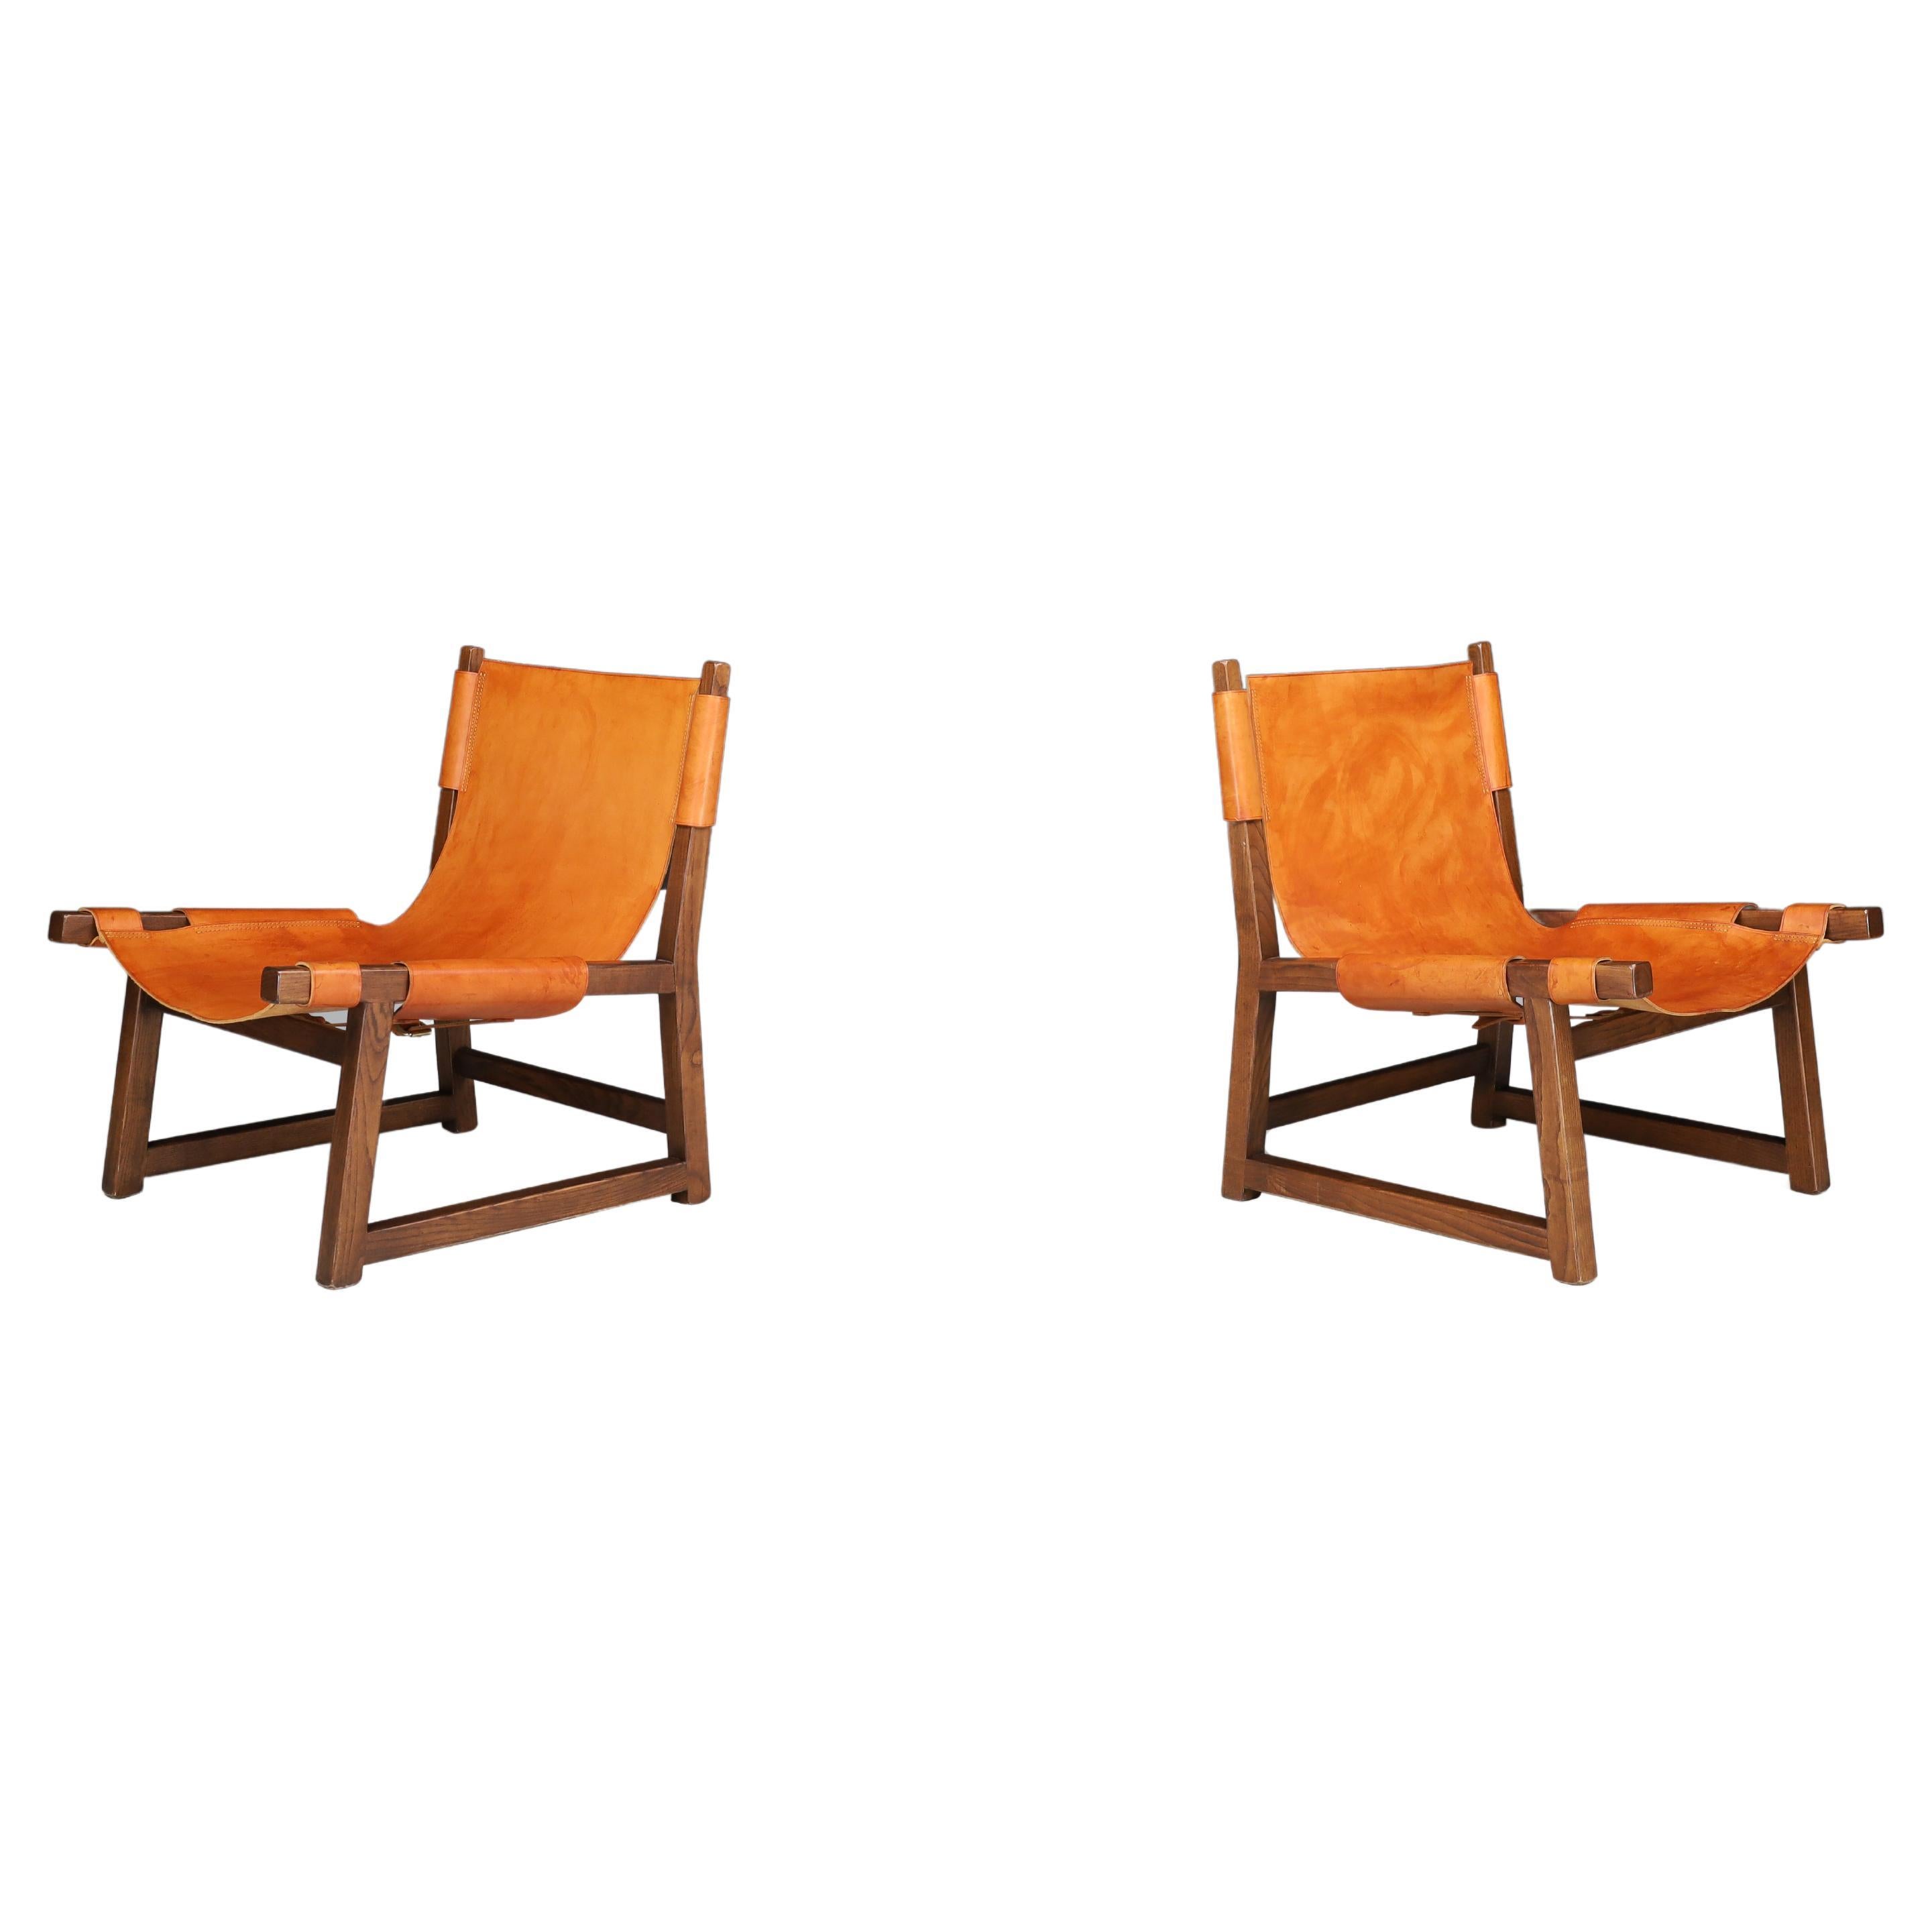 Paco Muñoz pair of 'Riaza' lounge chairs In Walnut and Cognac Leather Spain 1960 For Sale